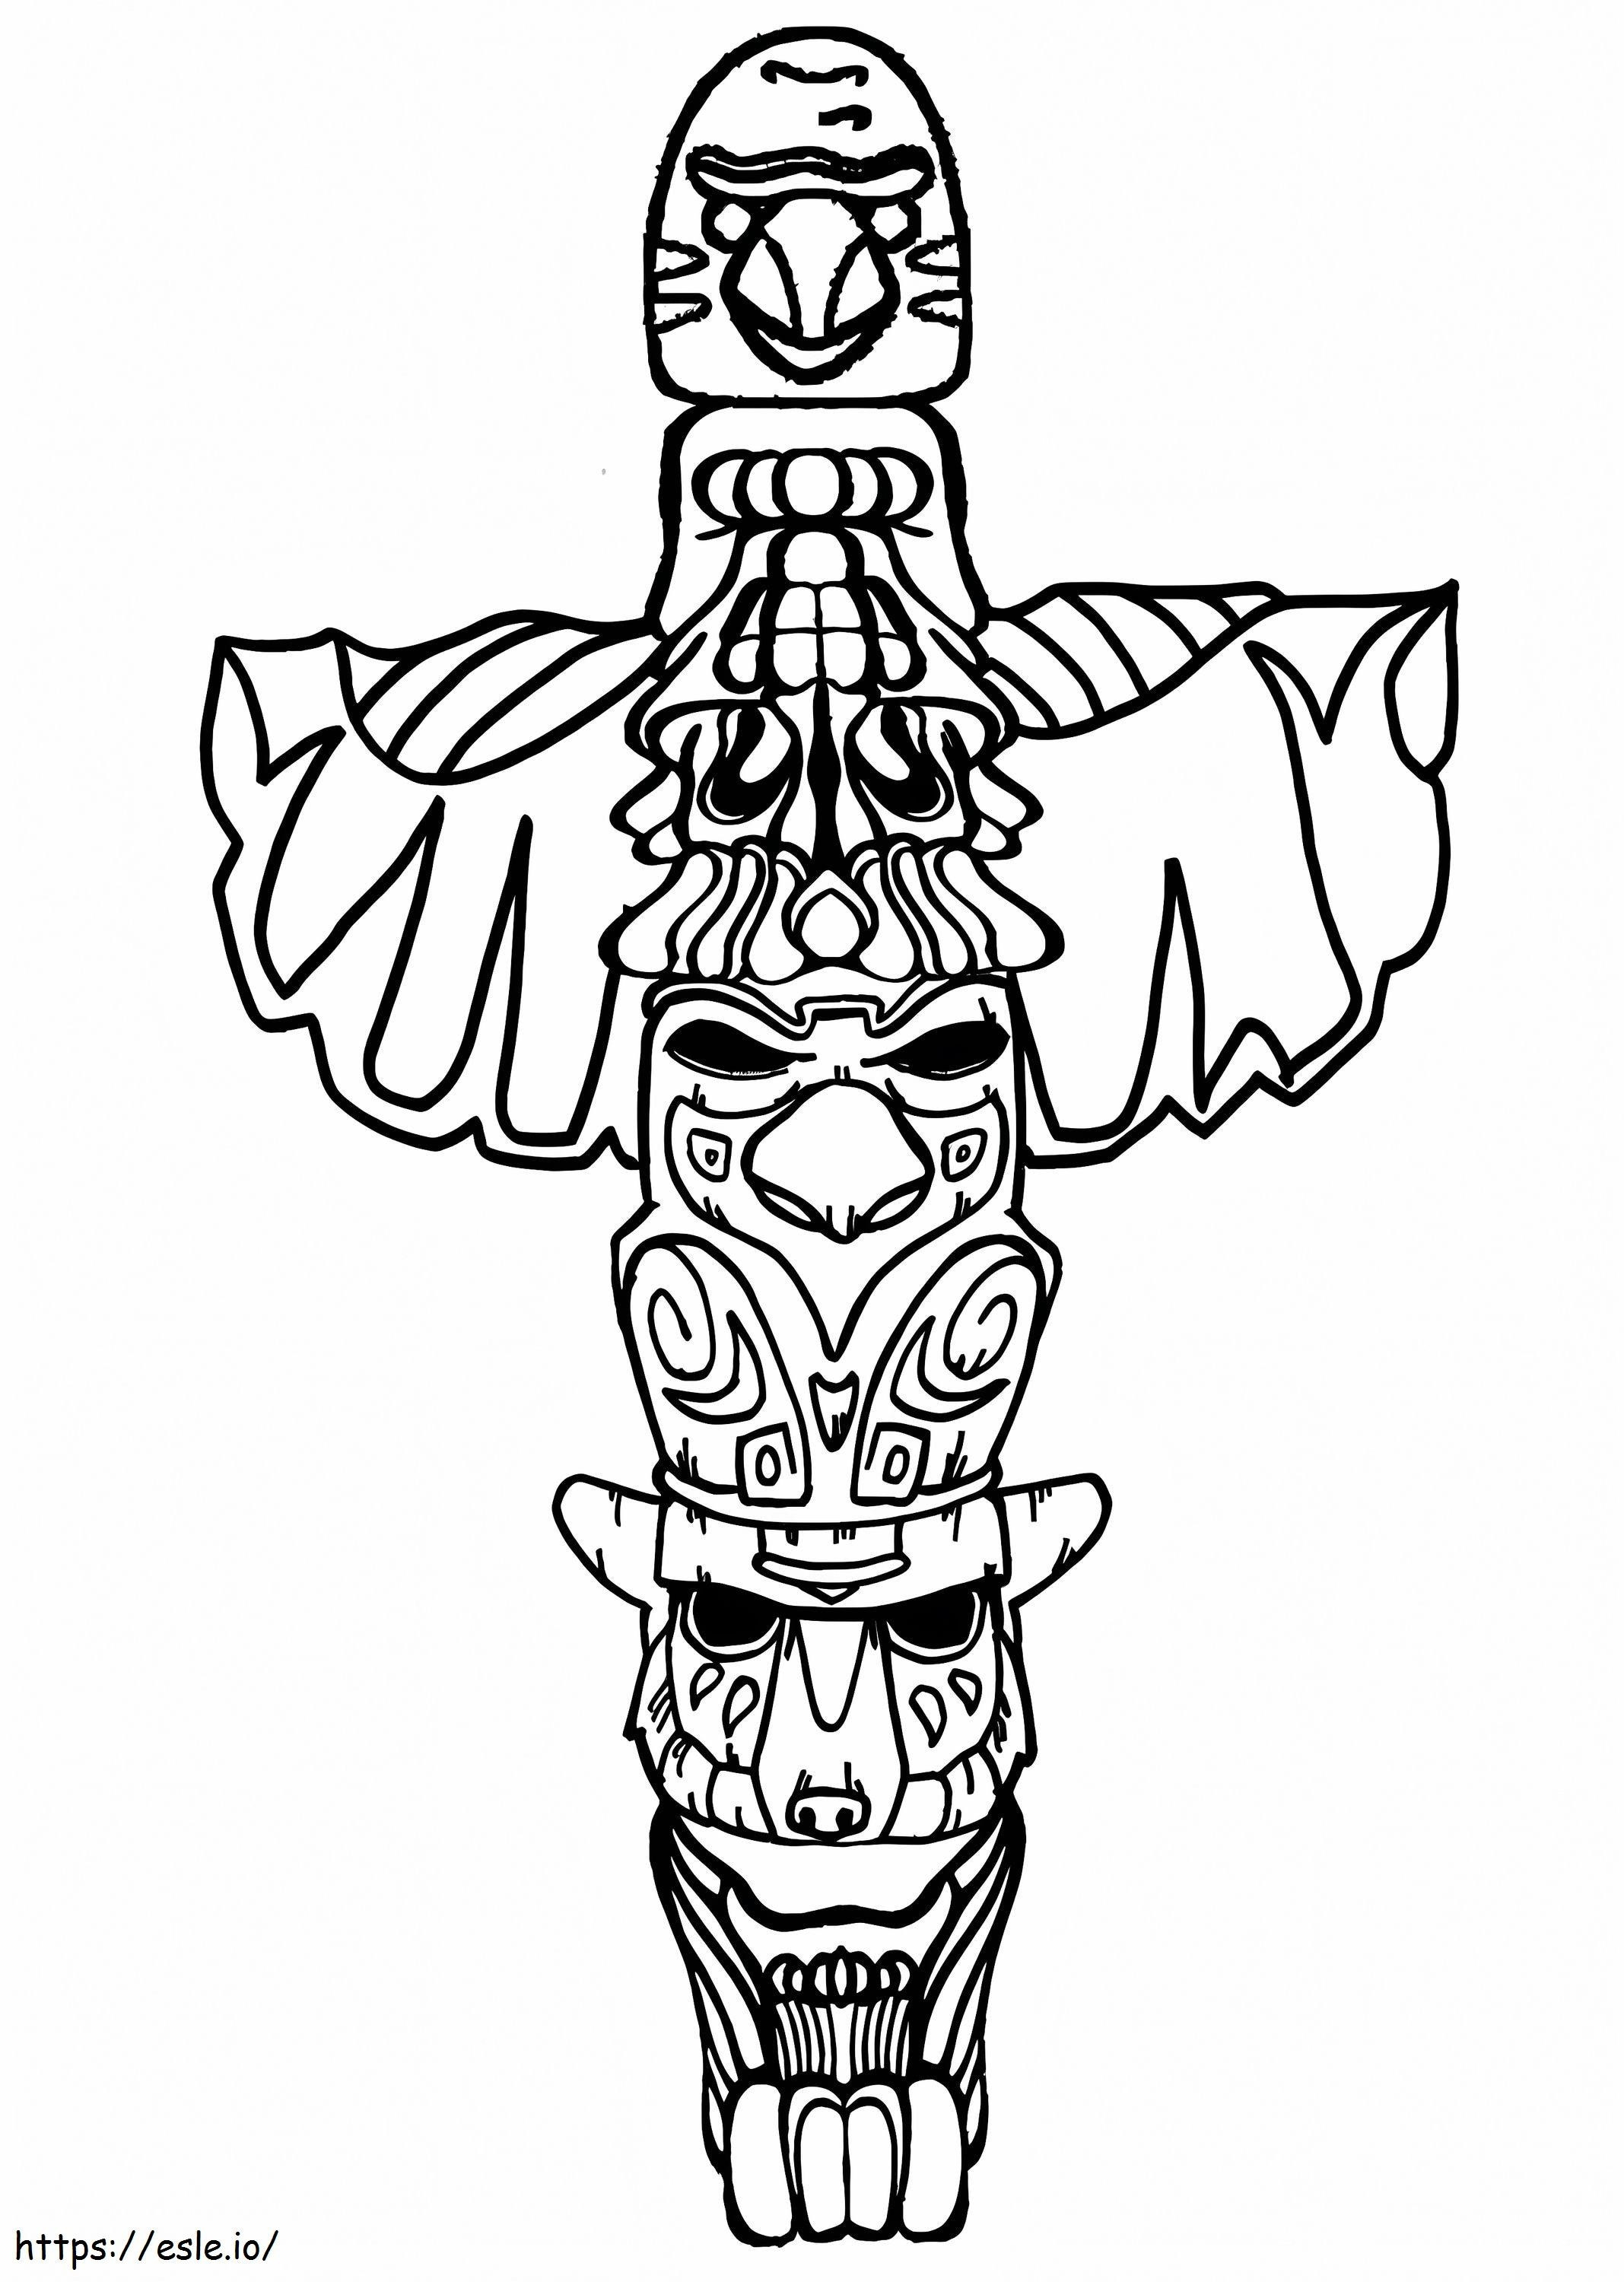 Ward Field 11 coloring page